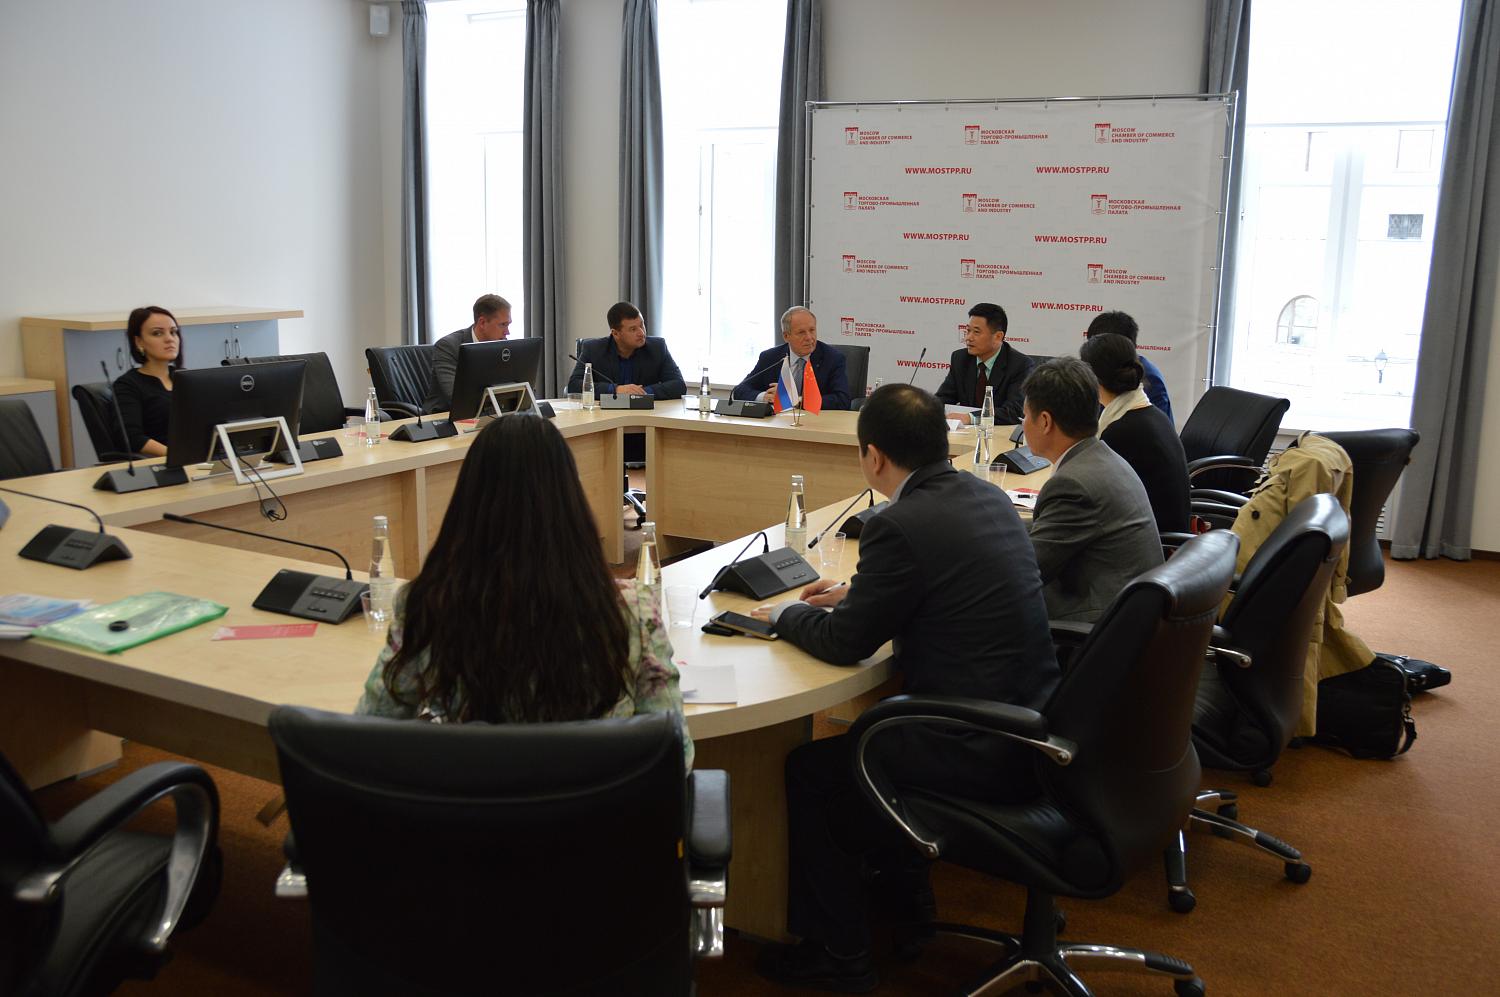 A meeting with representatives from the province of Guangdong, China